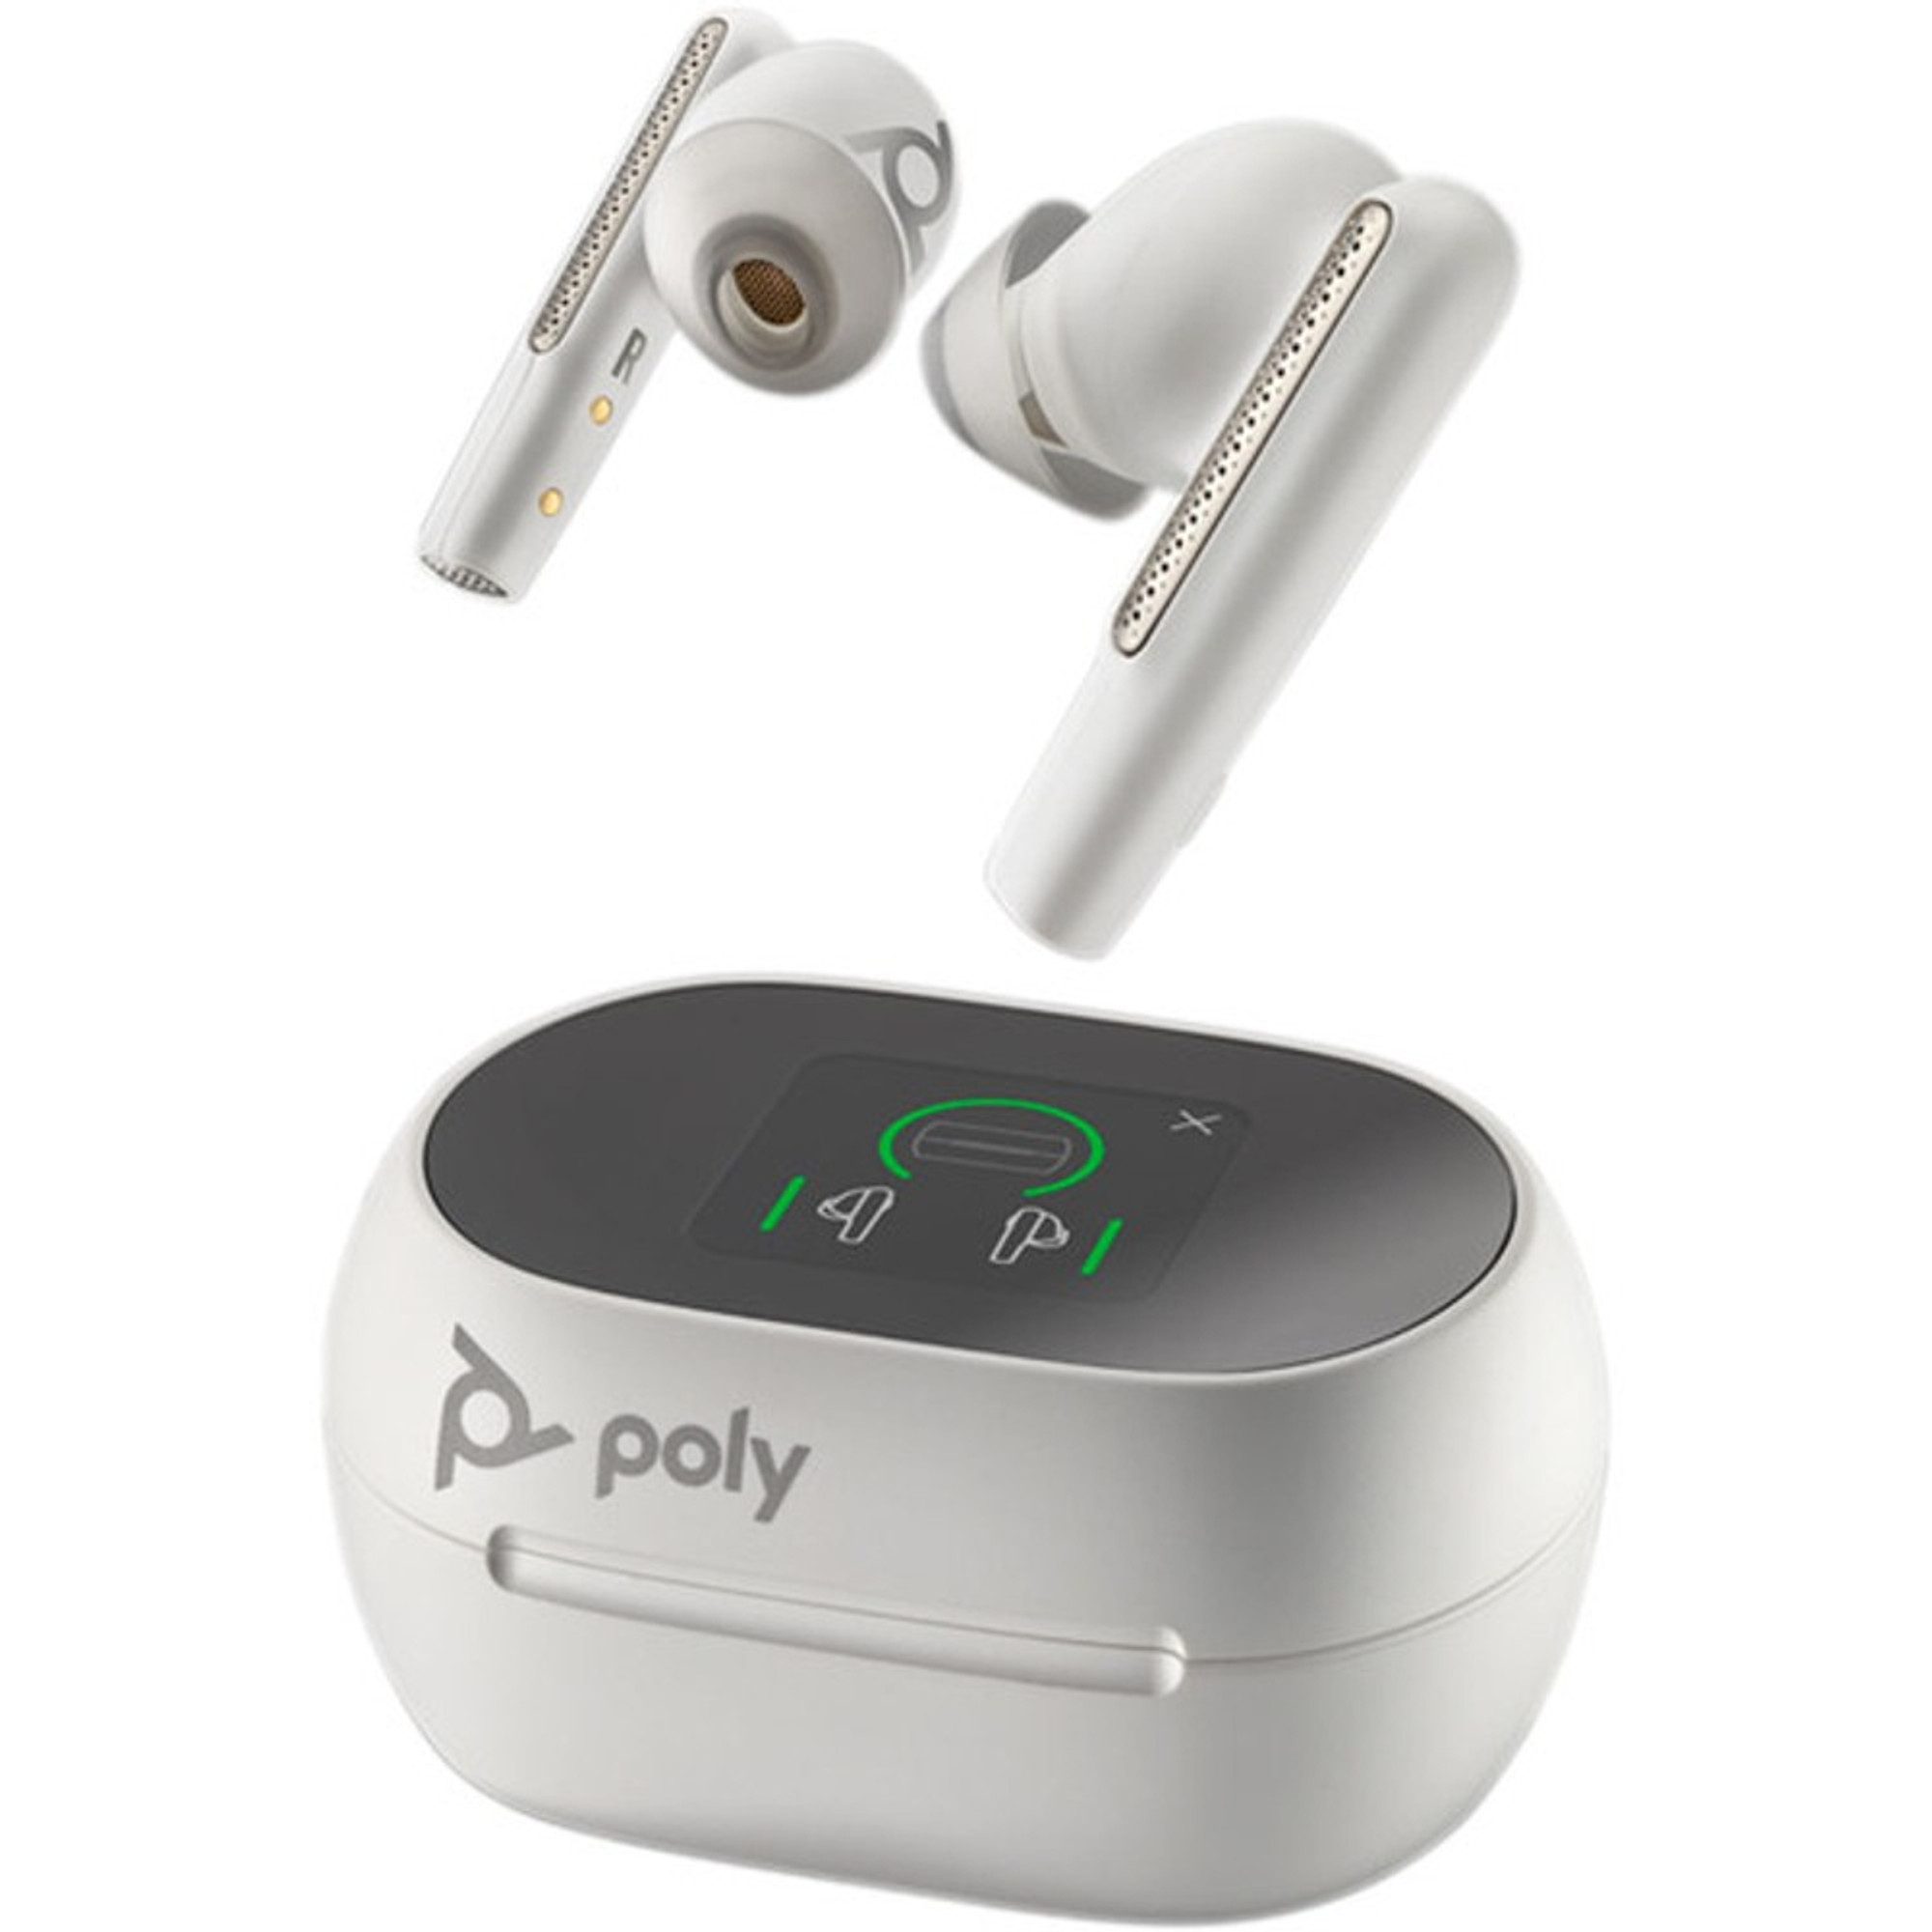 Poly Plantronics USB-A, Plantronics | (216754-01 / | Poly UC Voyager Plantronics True Earbuds 60+ Free (White) Voyager Headsets | Poly Charging Free HEADPHONES 7Y8G5AA) Case With Wireless Plantronics Touchscreen 60+ | Singapore Poly